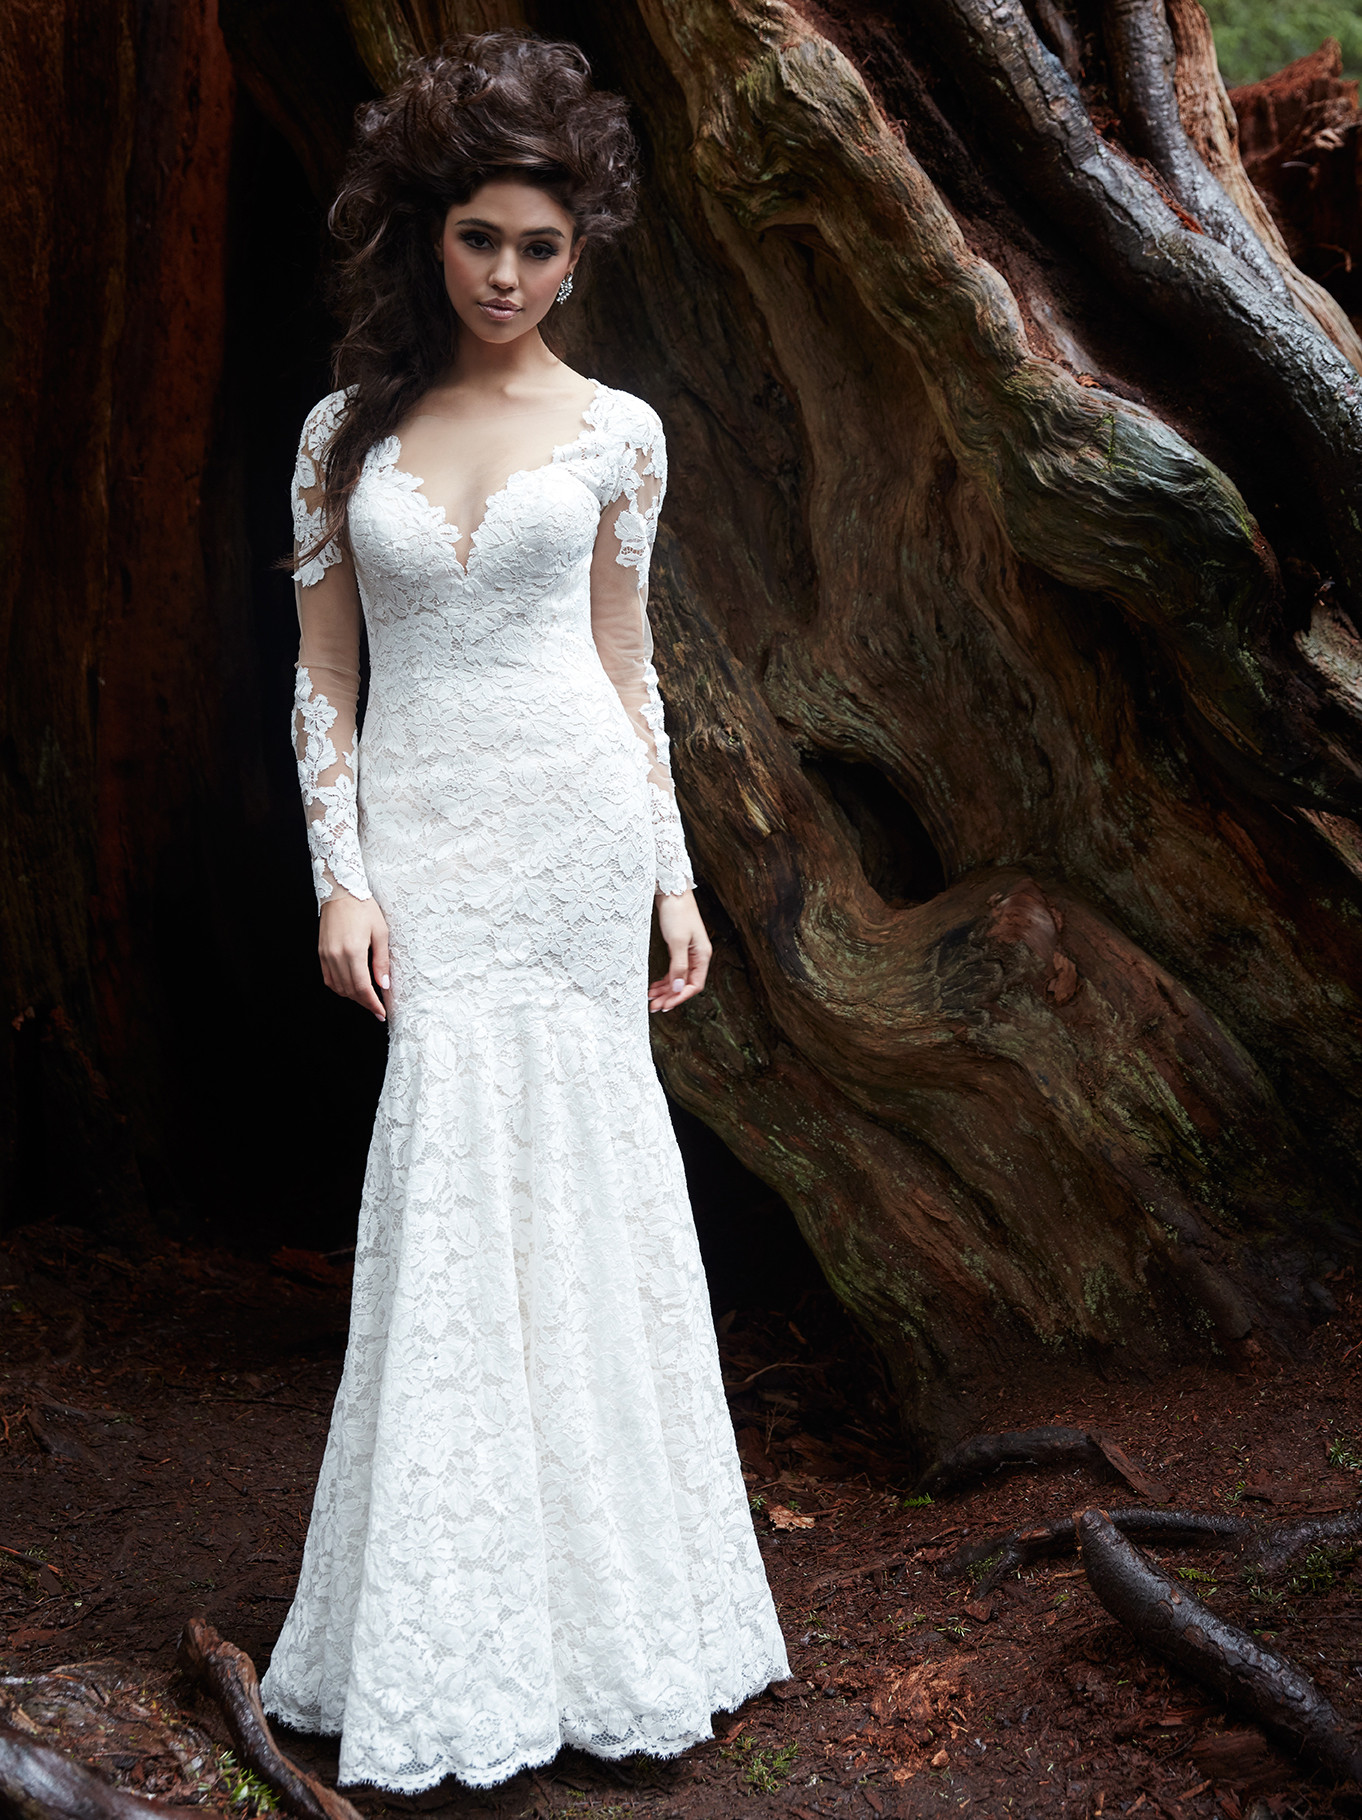 Wedding Dress Rental Nyc
 Celebrating Luxurious Lace at NYB&G of Raleigh